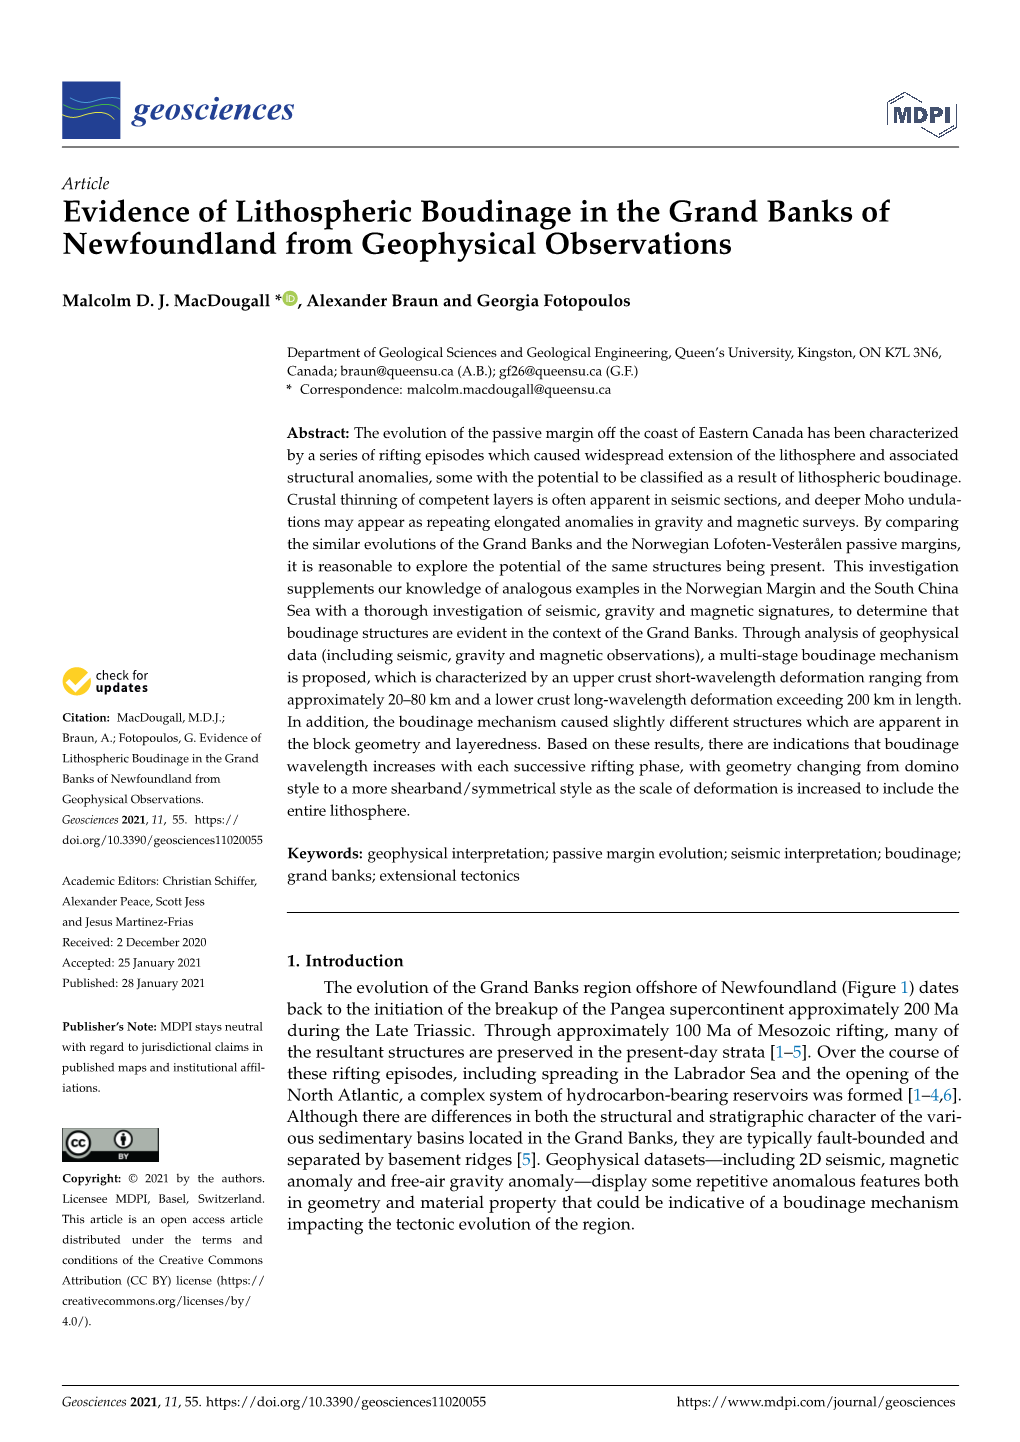 Evidence of Lithospheric Boudinage in the Grand Banks of Newfoundland from Geophysical Observations